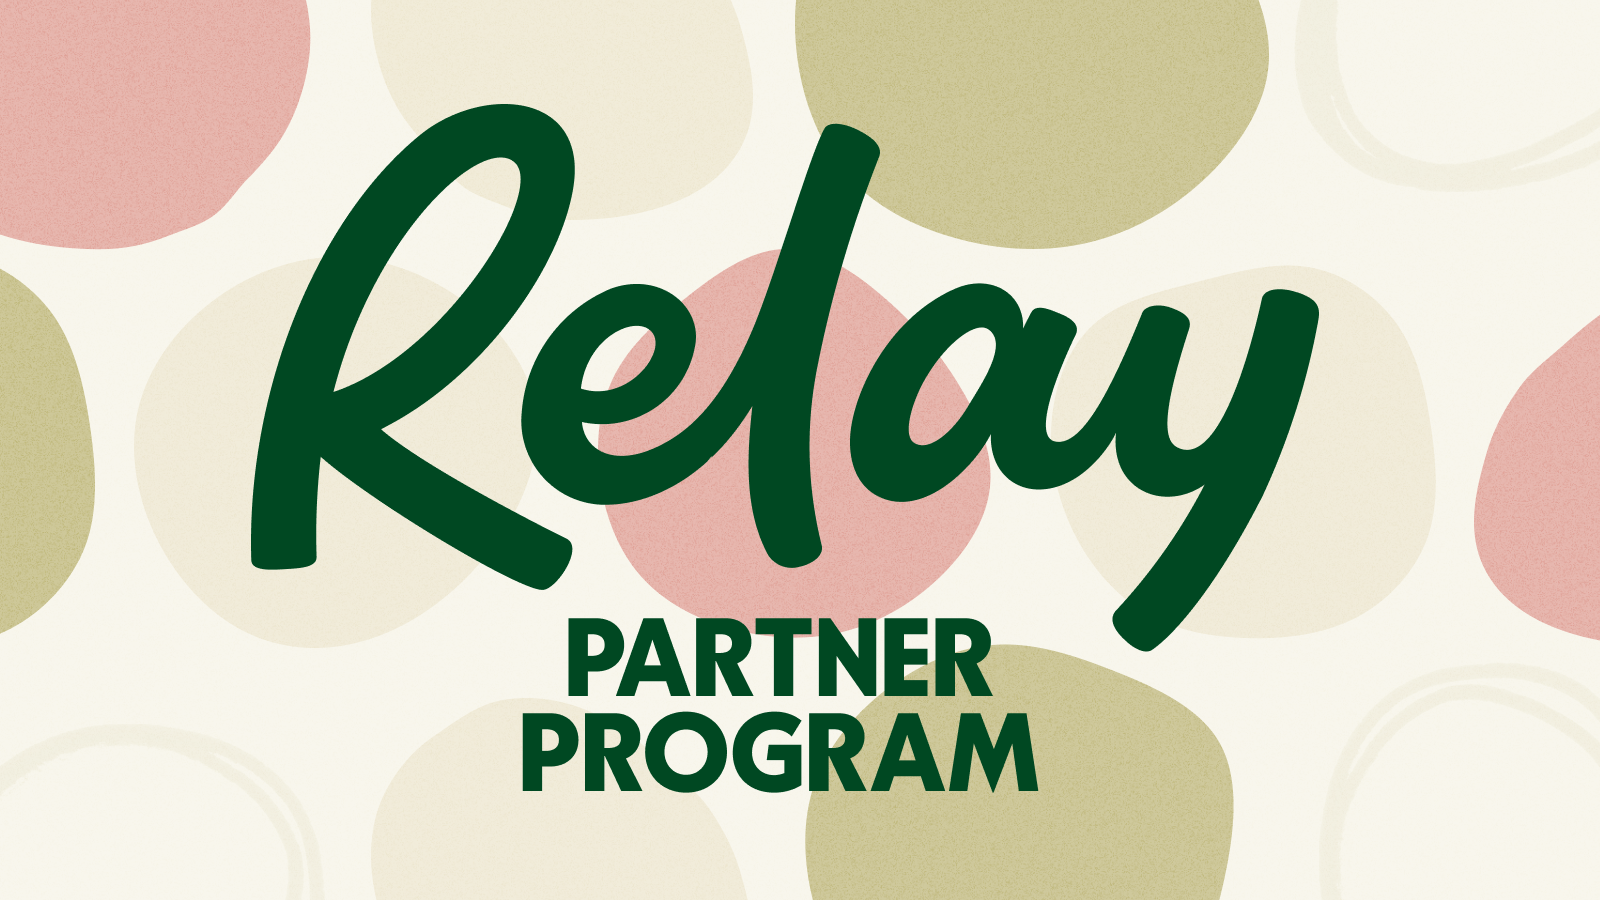 Relay’s new Partner Program empowers accountants and bookkeepers to advise on client banking